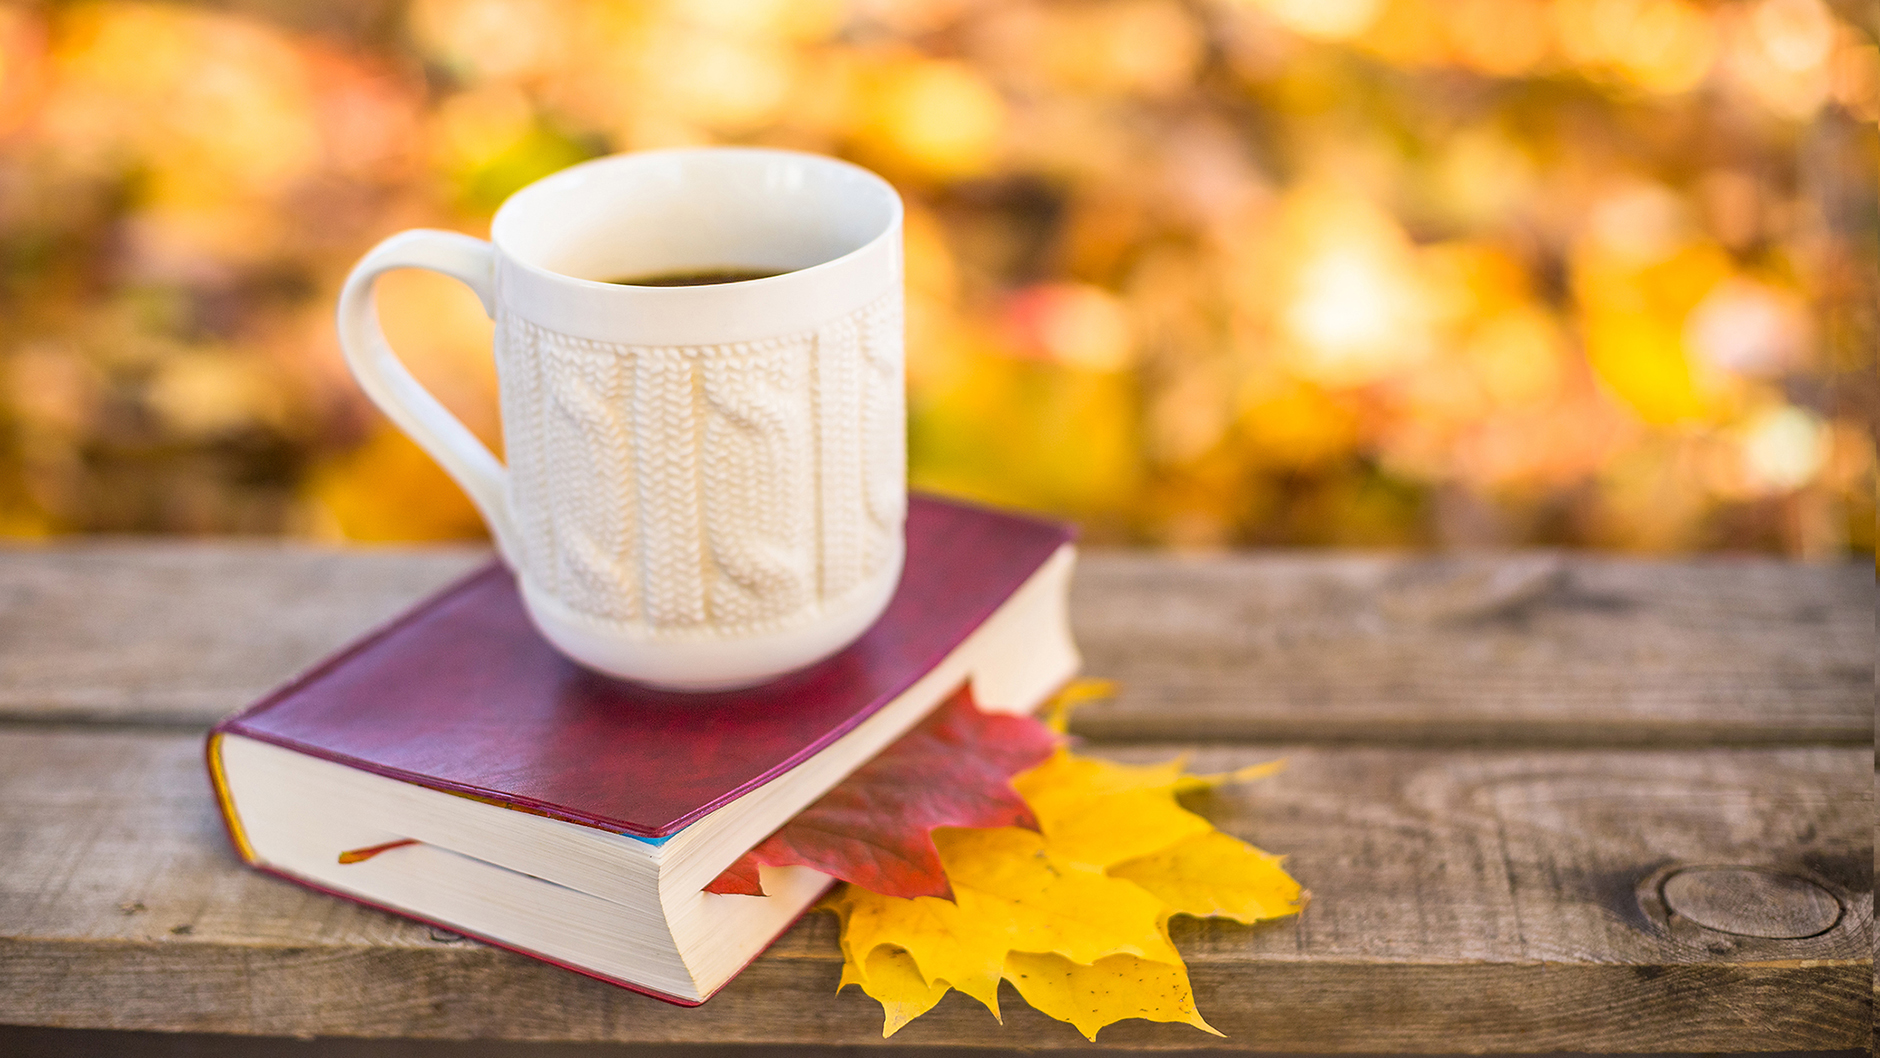 cozy fall tableau with hot drink in mug on red leather book with yellow leaves